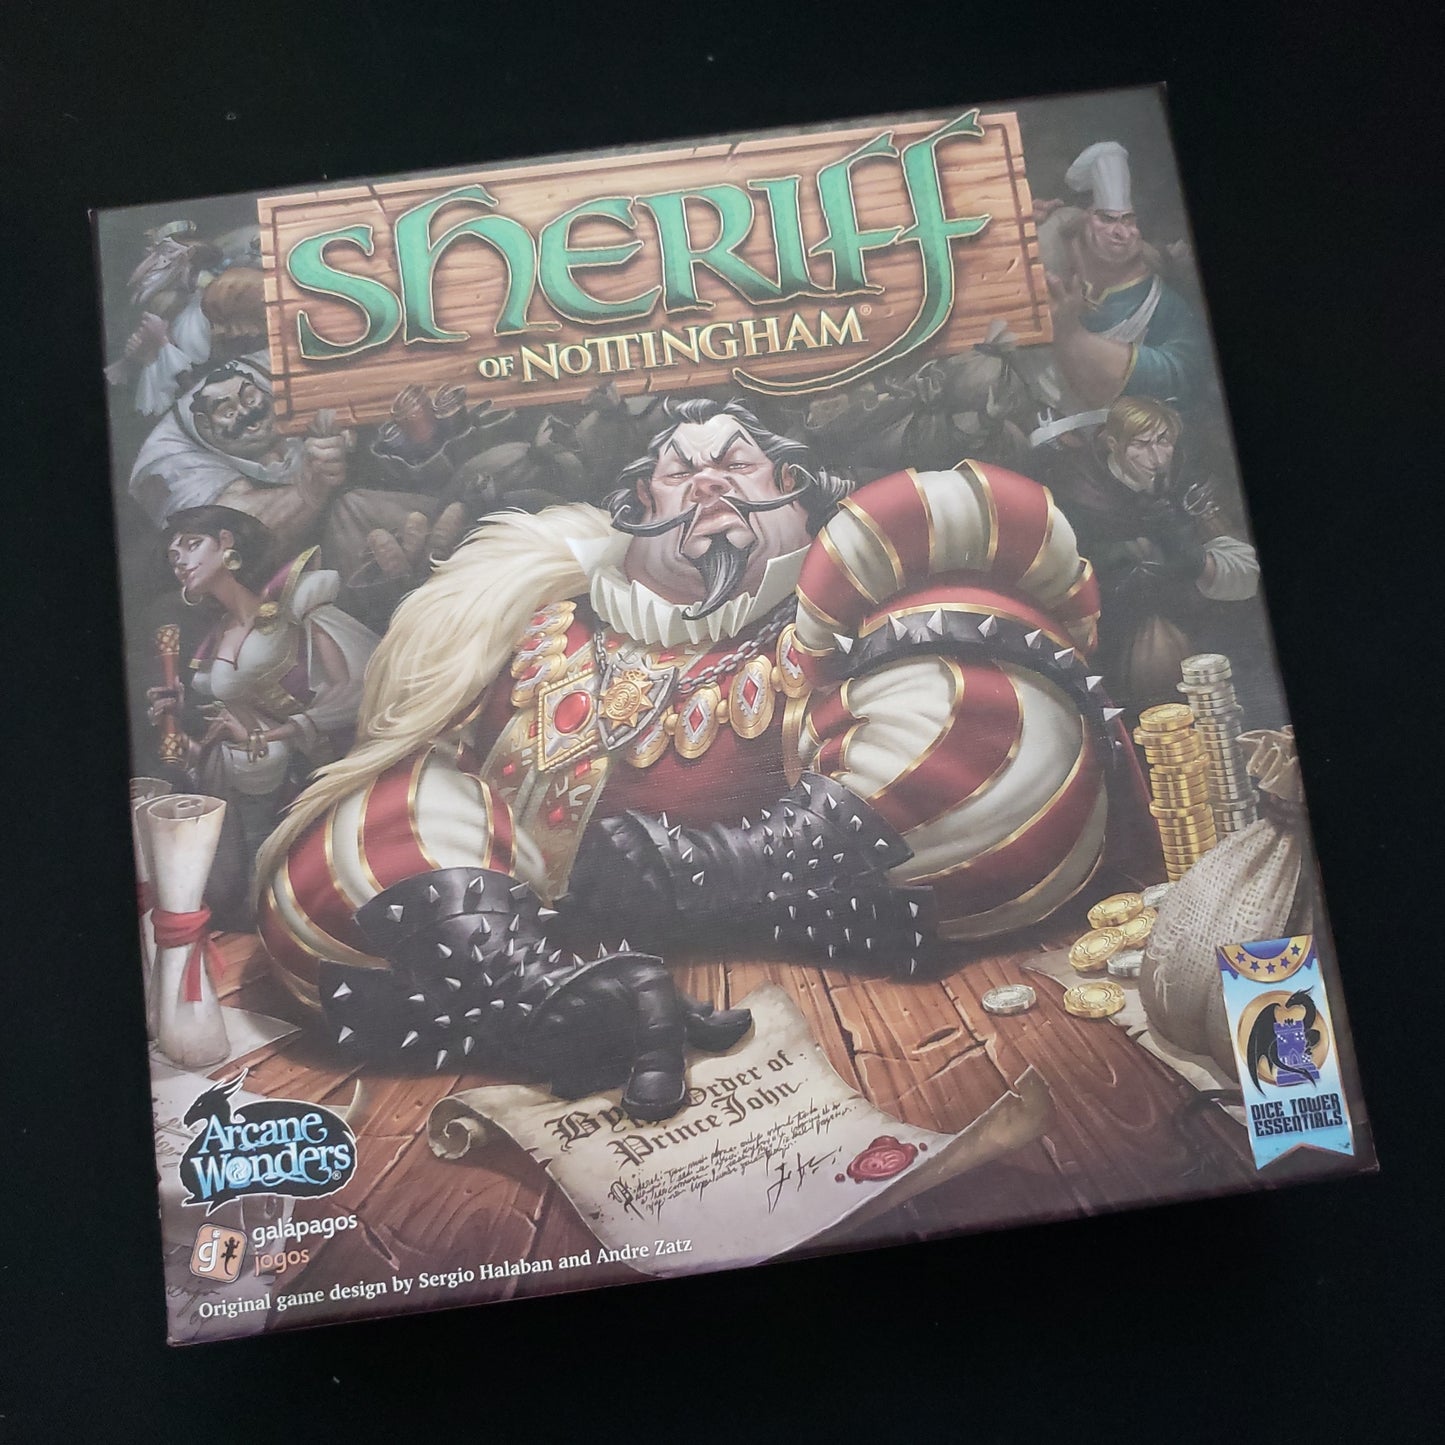 Image shows the front cover of the box of the Sheriff of Nottingham board game